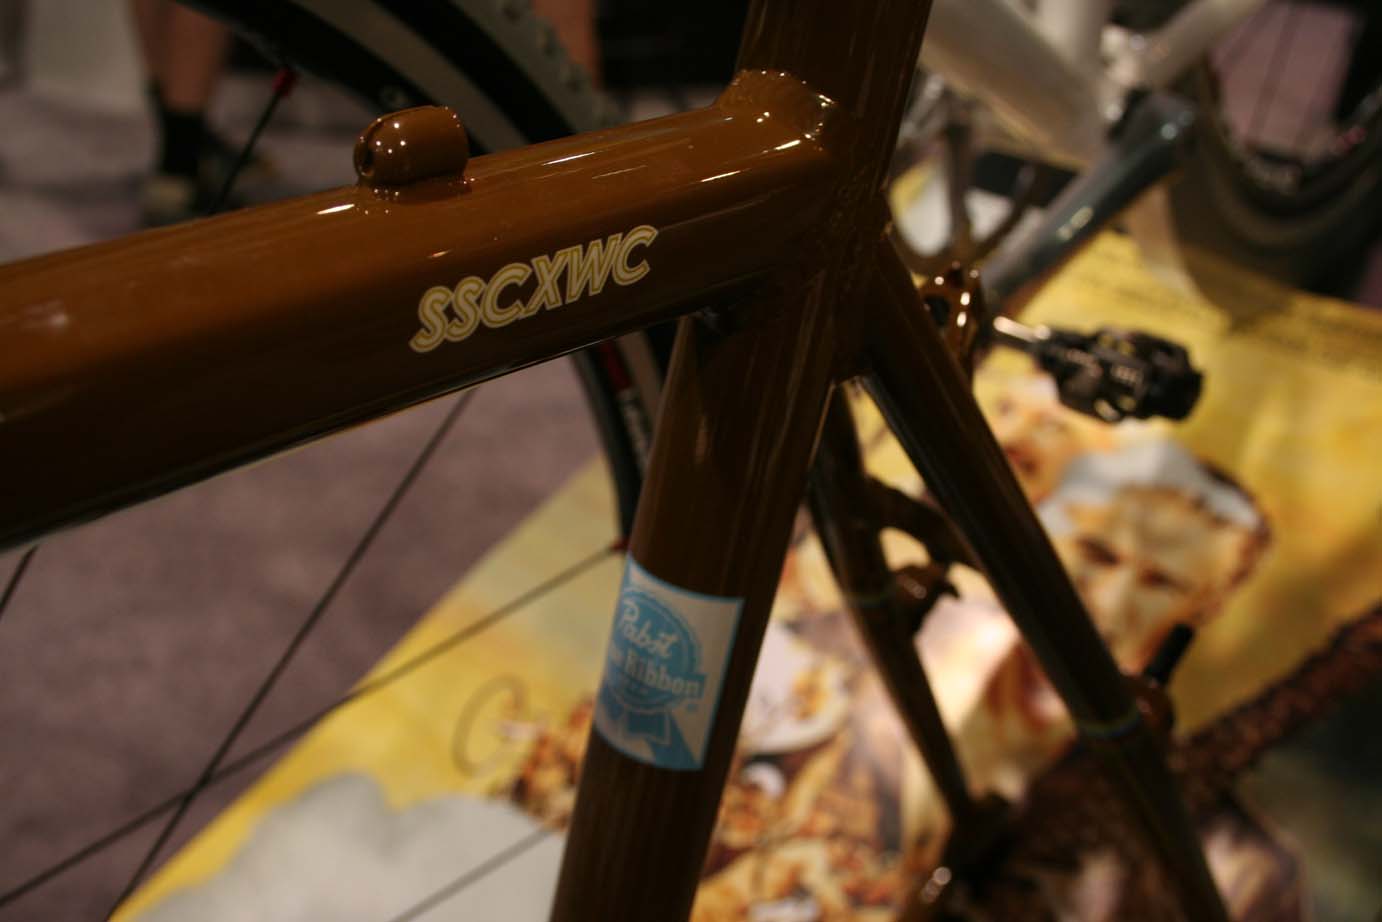 If you're not so lucky, you'll get 1 out of 49 brown SSCXWC frames. by Andrew Yee